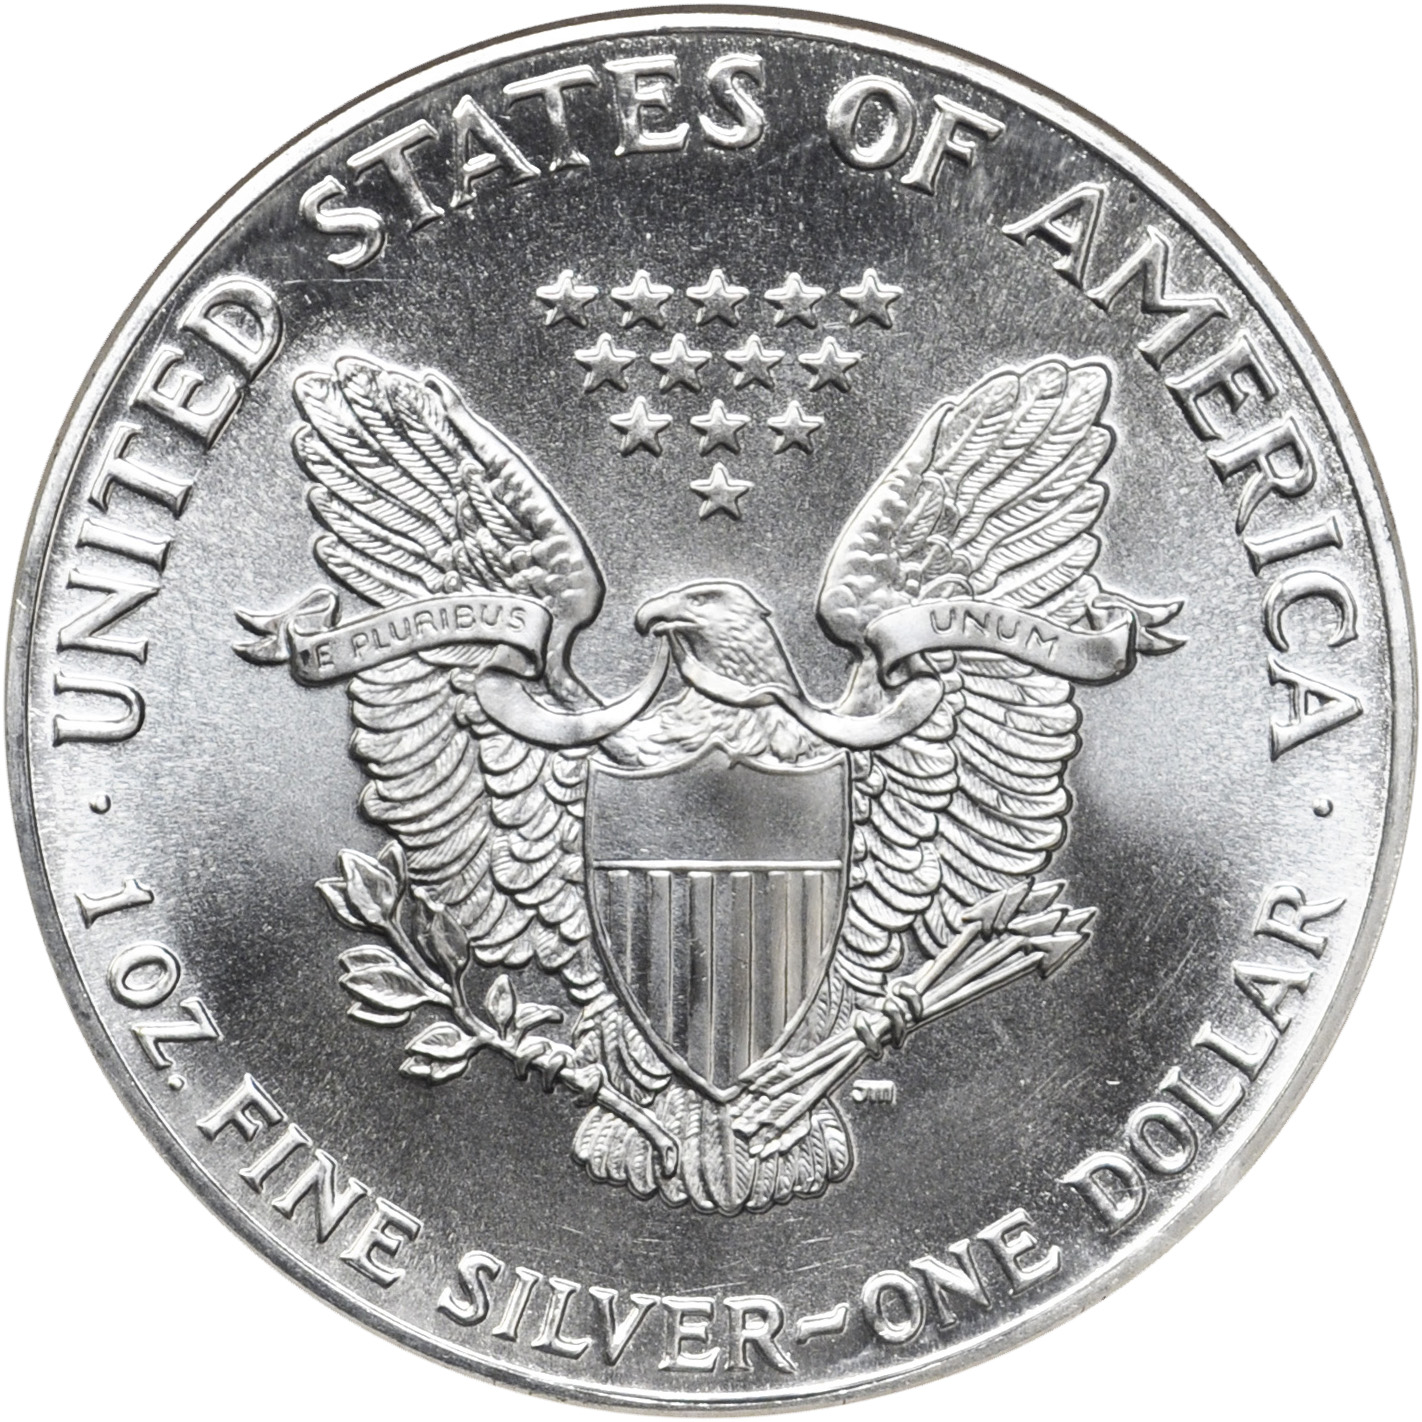 u.s. silver coins value